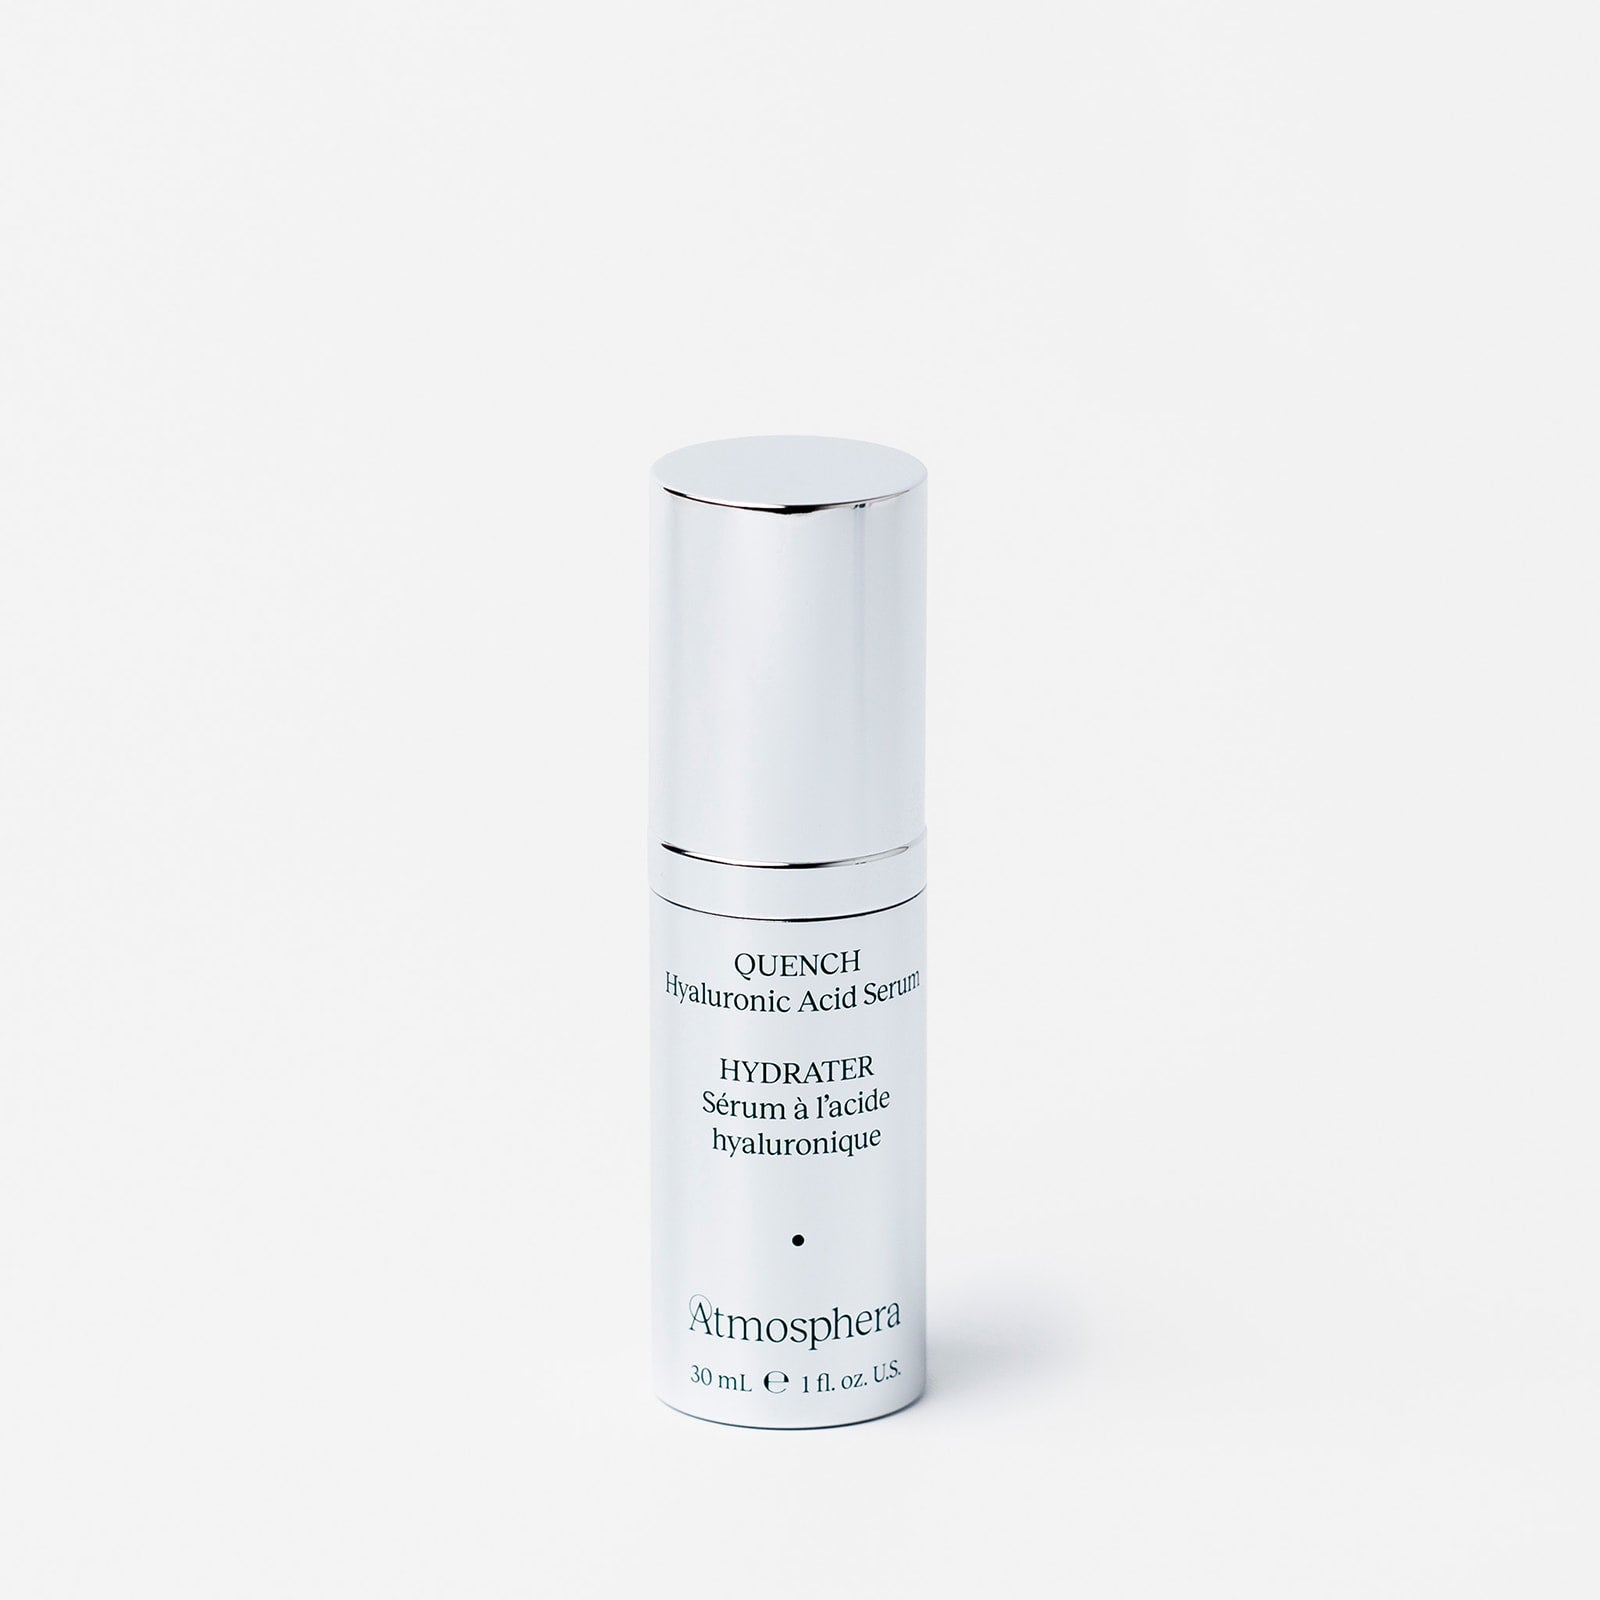 Quench - Hydrating Gel with Hyaluronic Acid + EGF + Peptides - Atmosphera